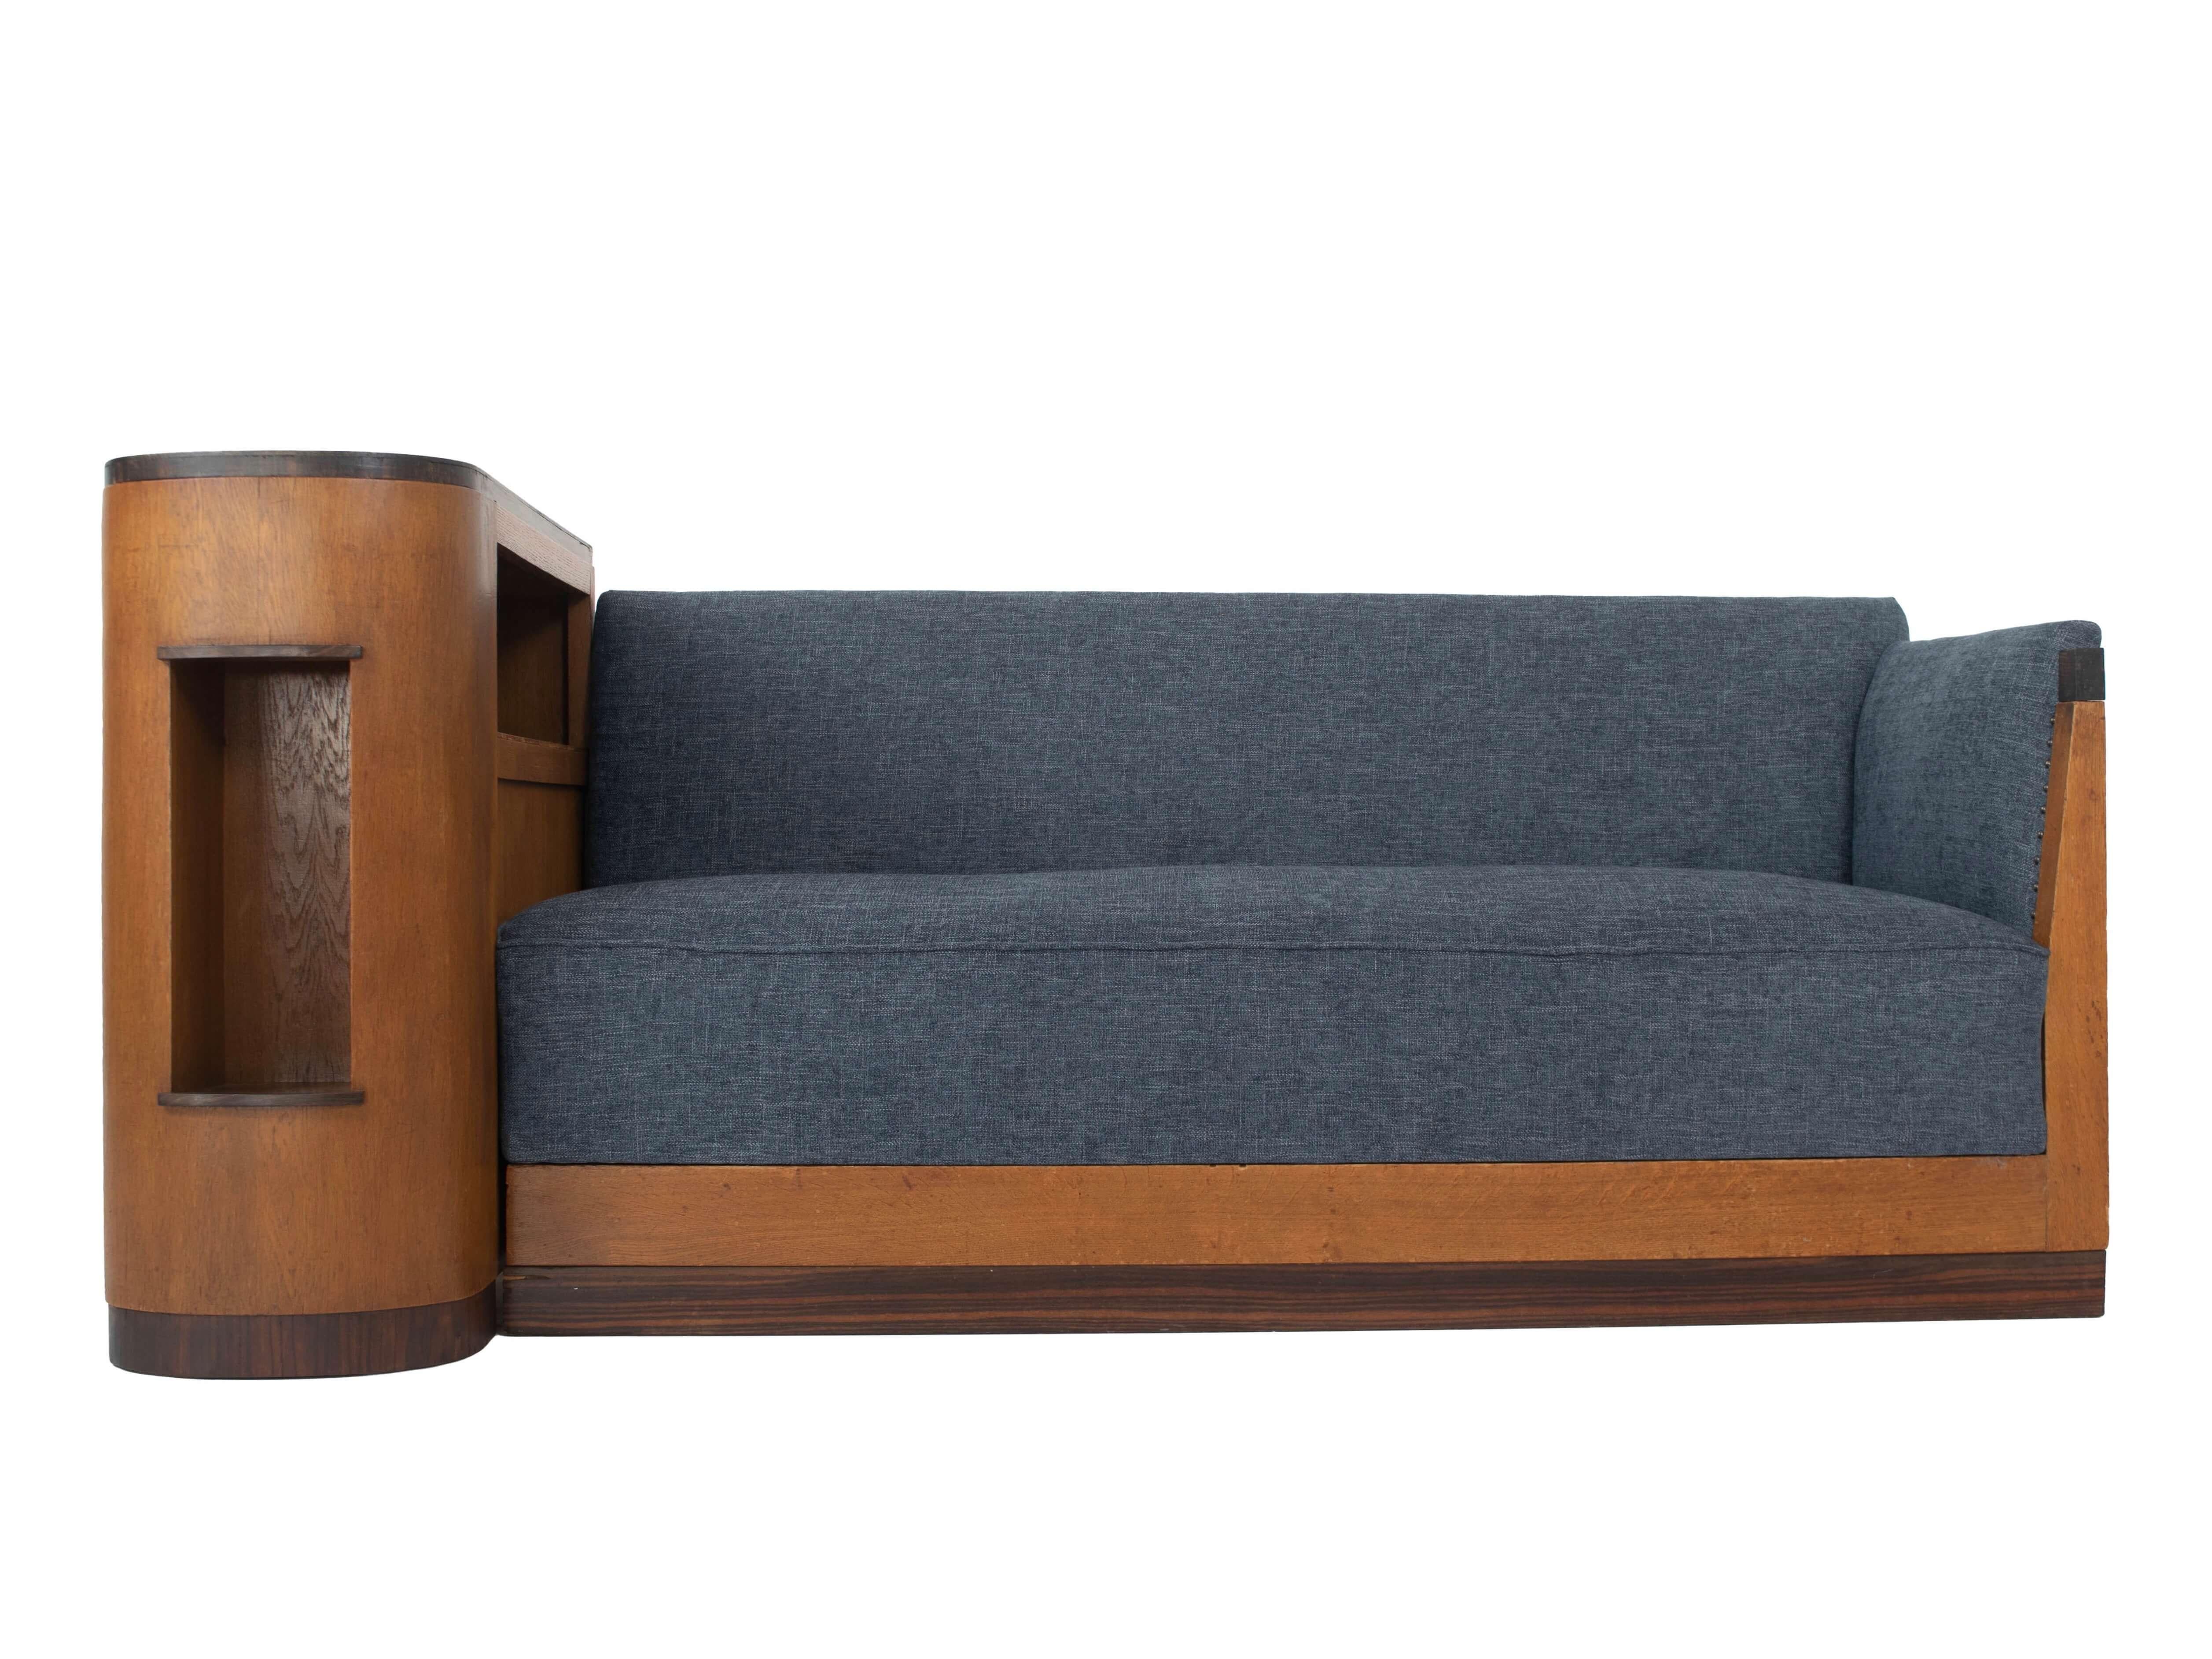 Amazing Amsterdam school sofa or cozy corner from The Netherlands 1930s. This sofa consists of two elements; the left cabinet with storage and the seating area. The base is made of oak and coromandel details. The seating area has been newly